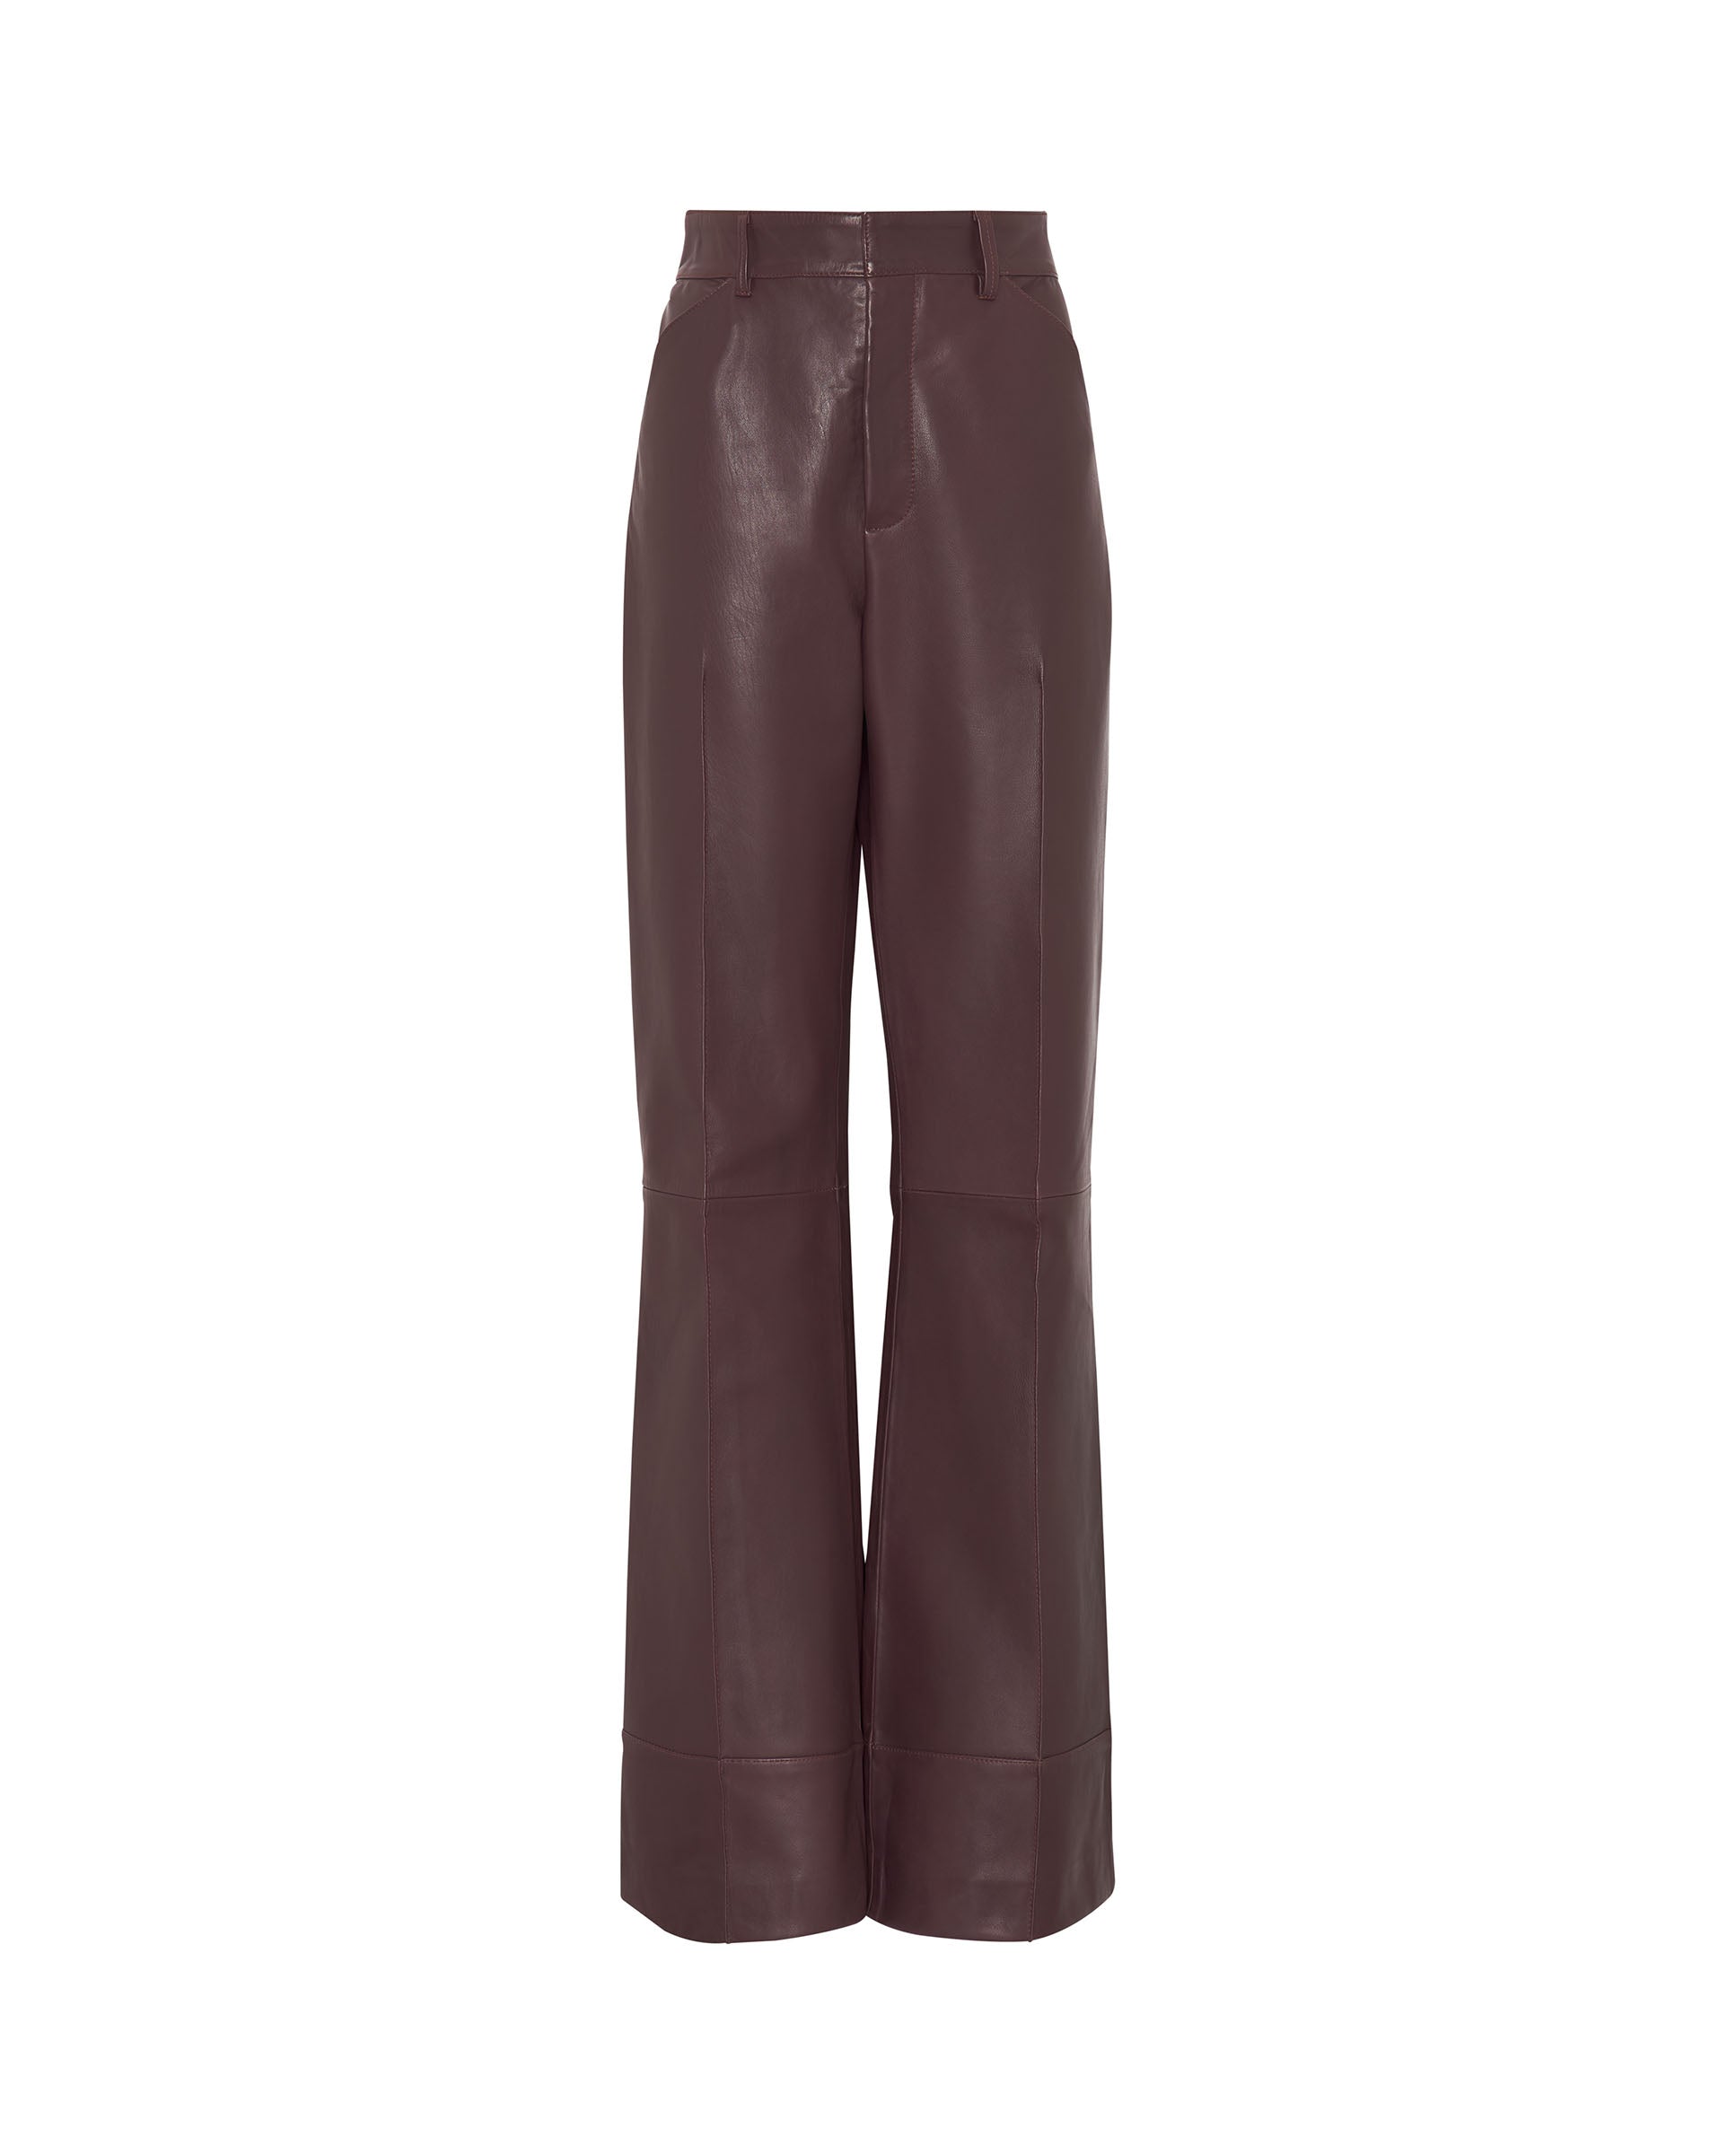 Burgundy leather trousers – 02413-0050